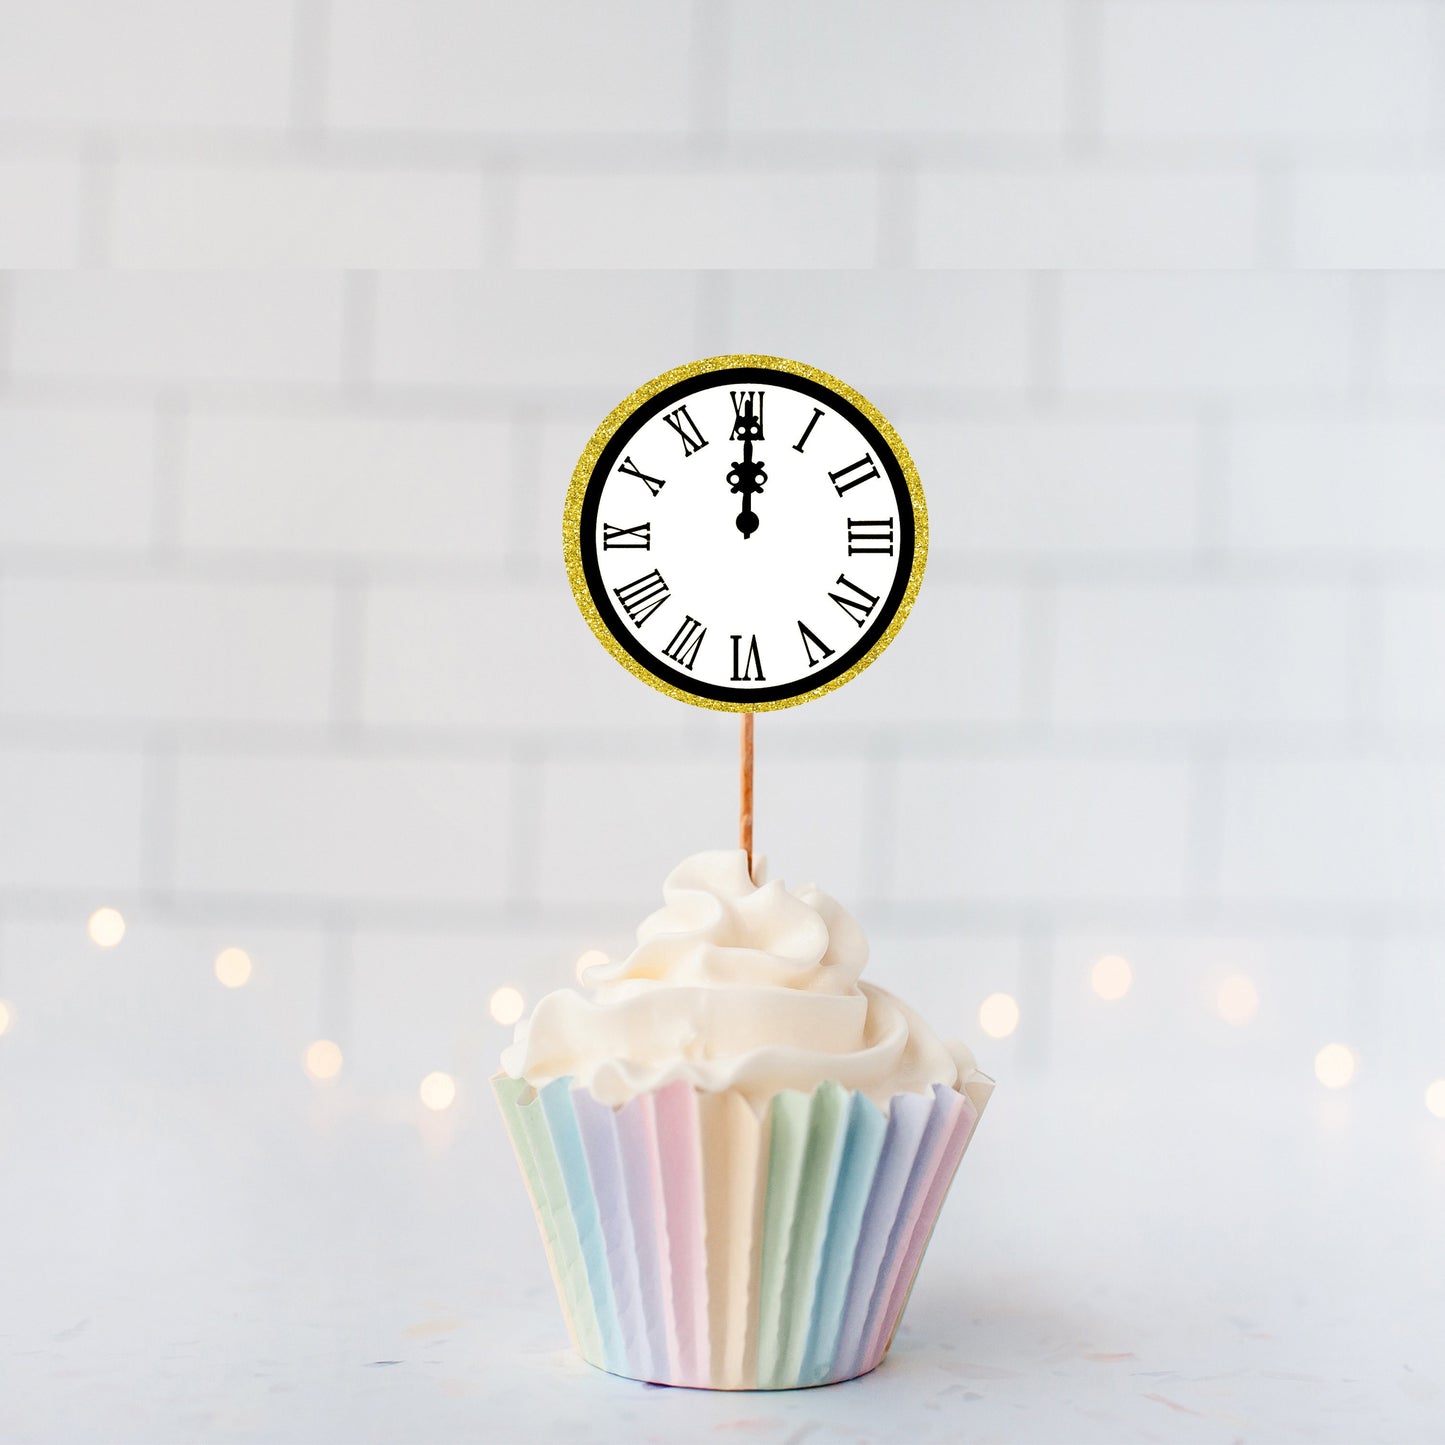 Clock Strikes Midnight Cupcake Toppers - Set of 12